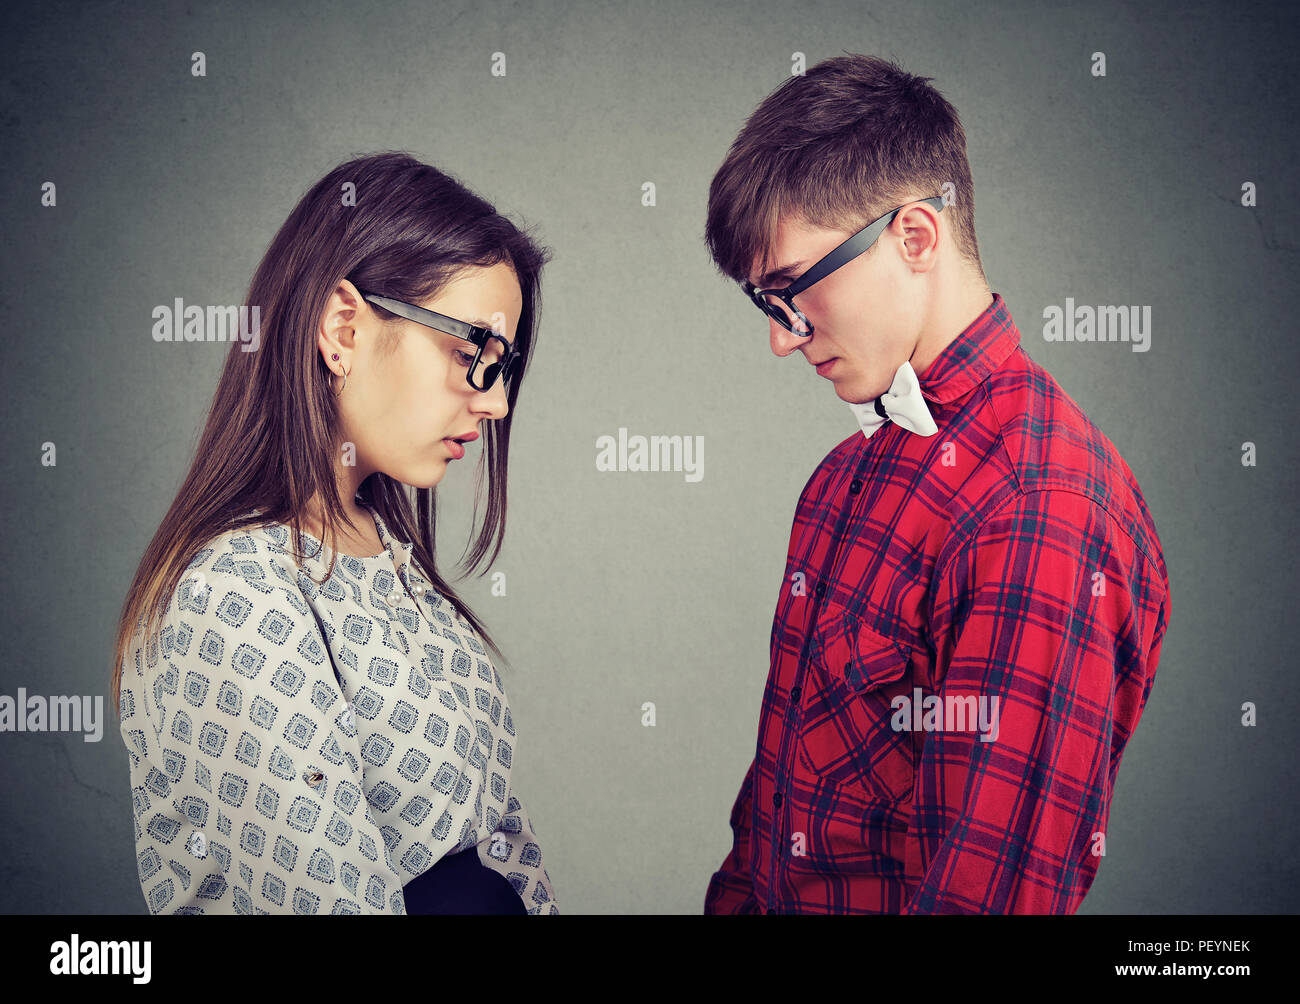 Side view of young man and woman looking down standing opposite with feelings of regret and sadness Stock Photo